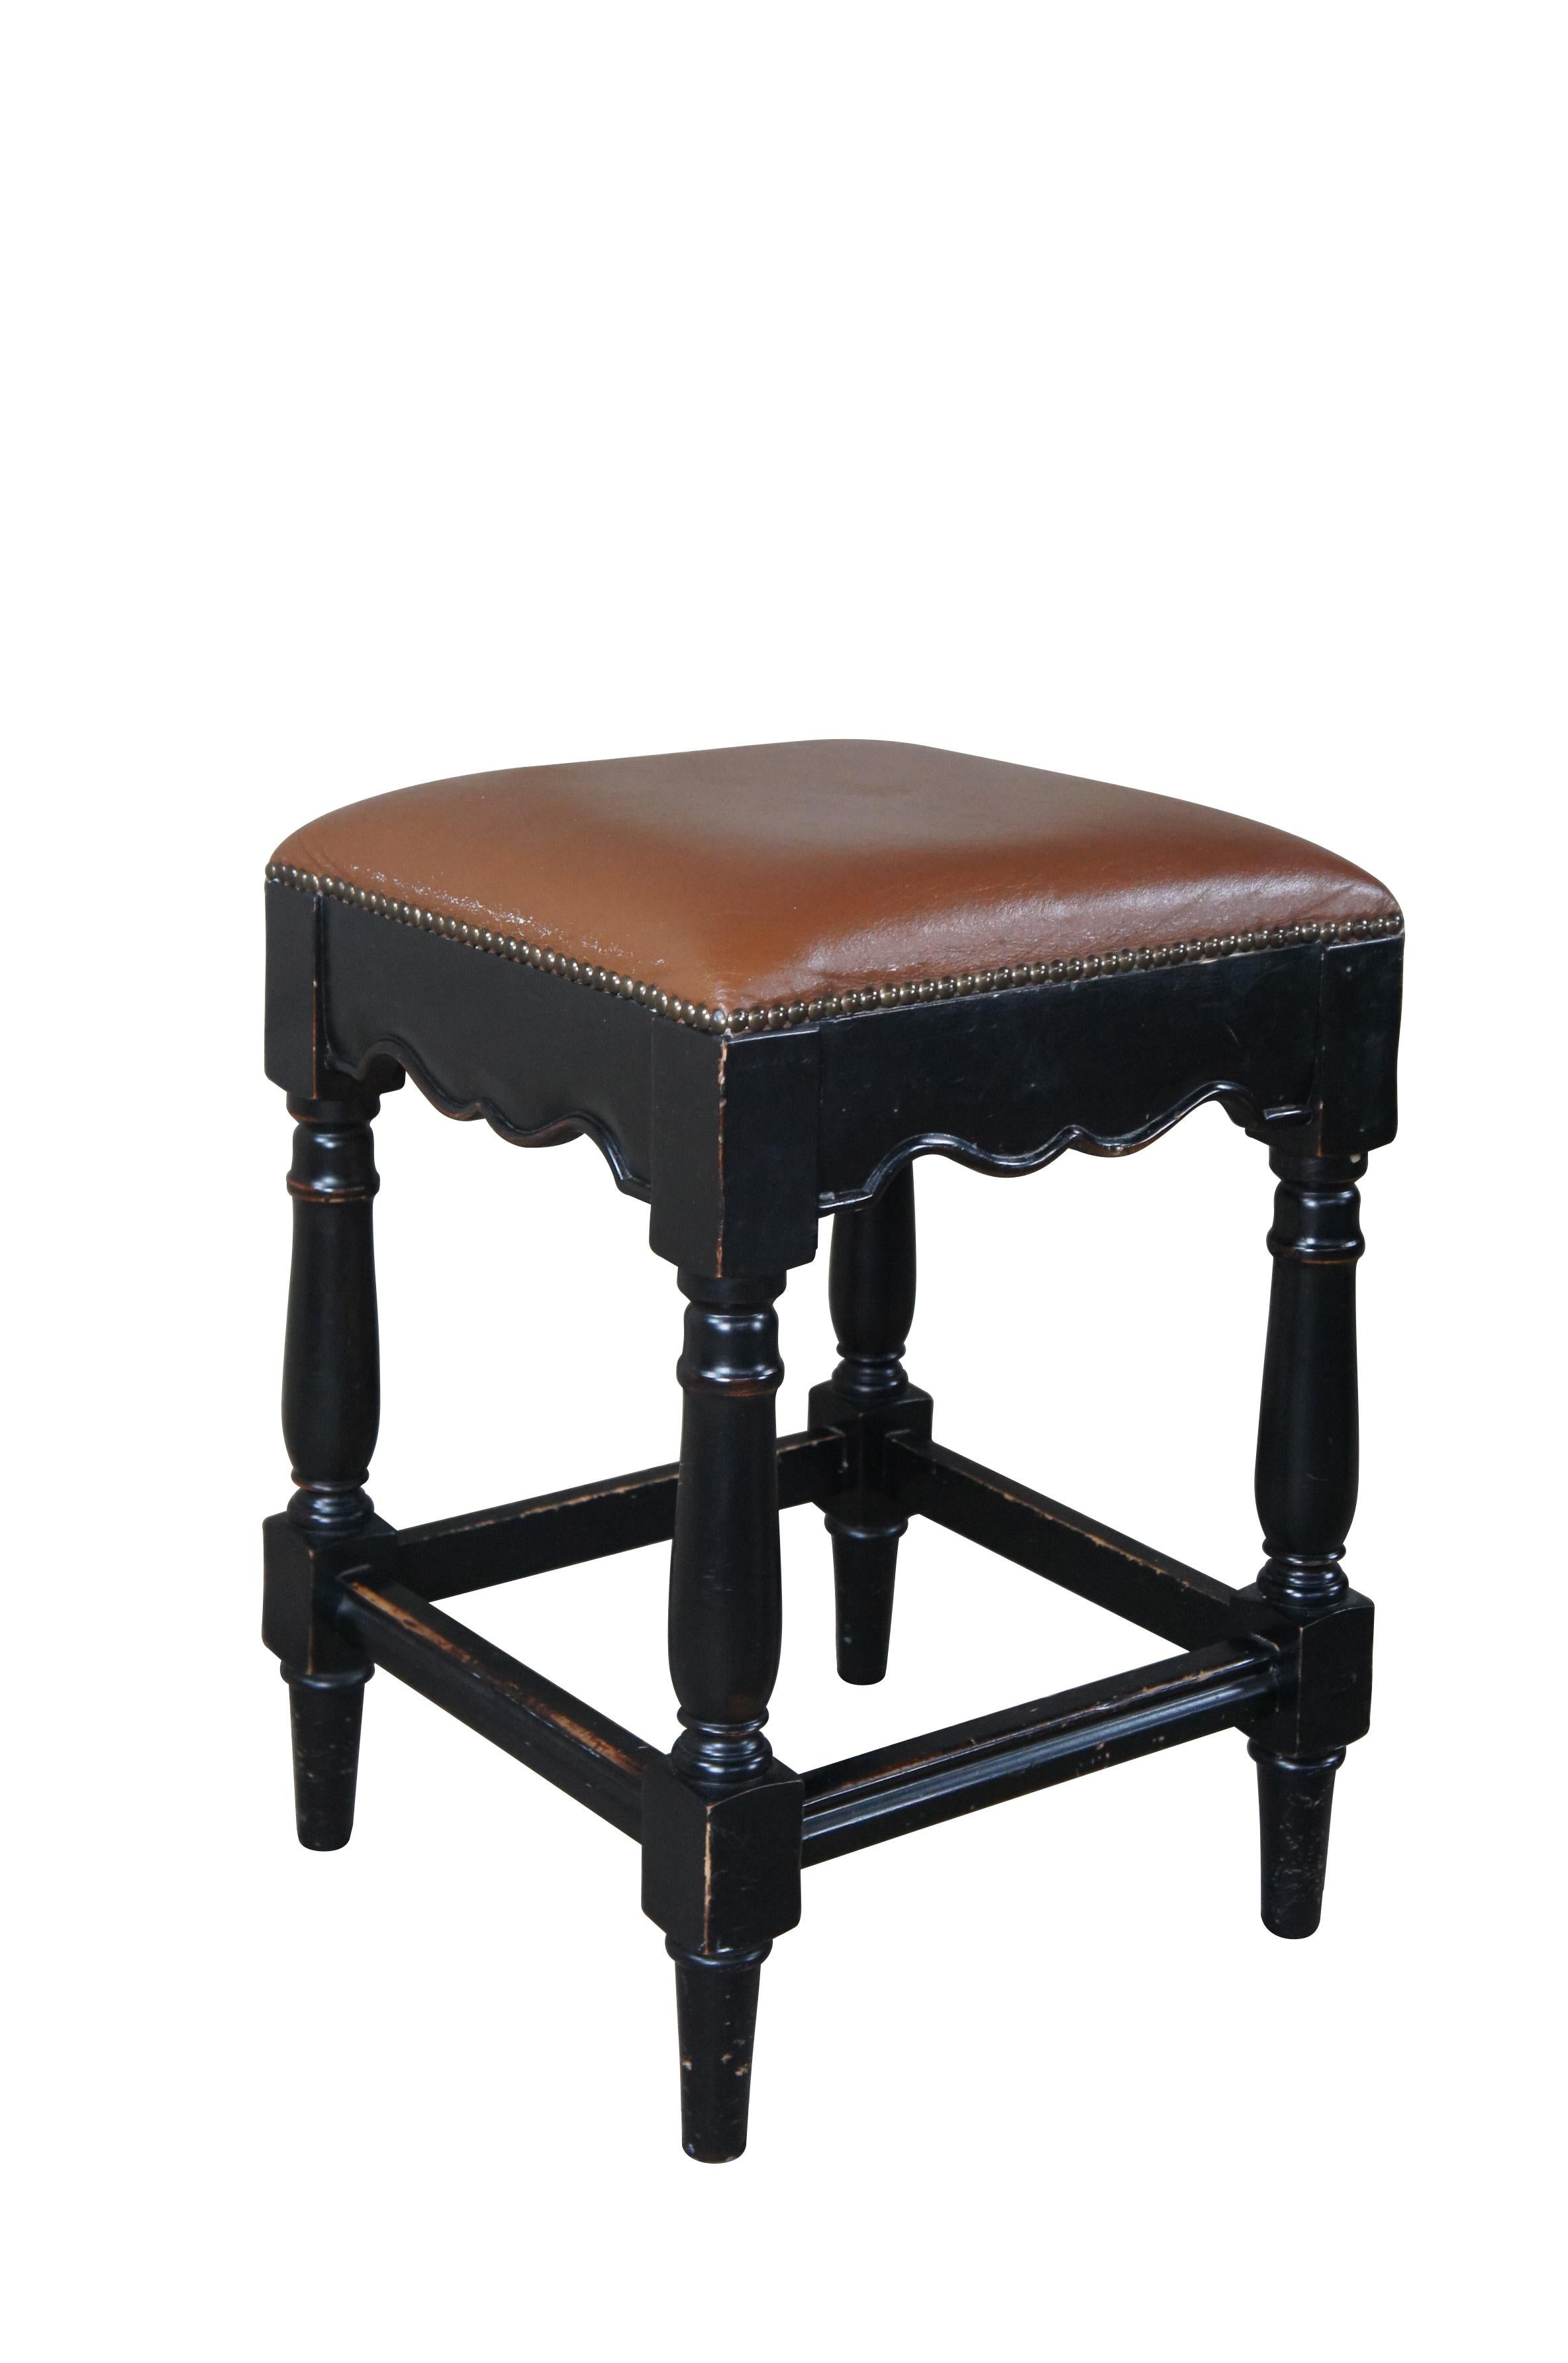 Four vintage Ballard Designs Marlow low bar or counter height stools featuring French Country styling with ebonized frame, leather seats and brass nailhead trim.  Distributed by Hillsdale Furniture inc.

Dimensions:
16